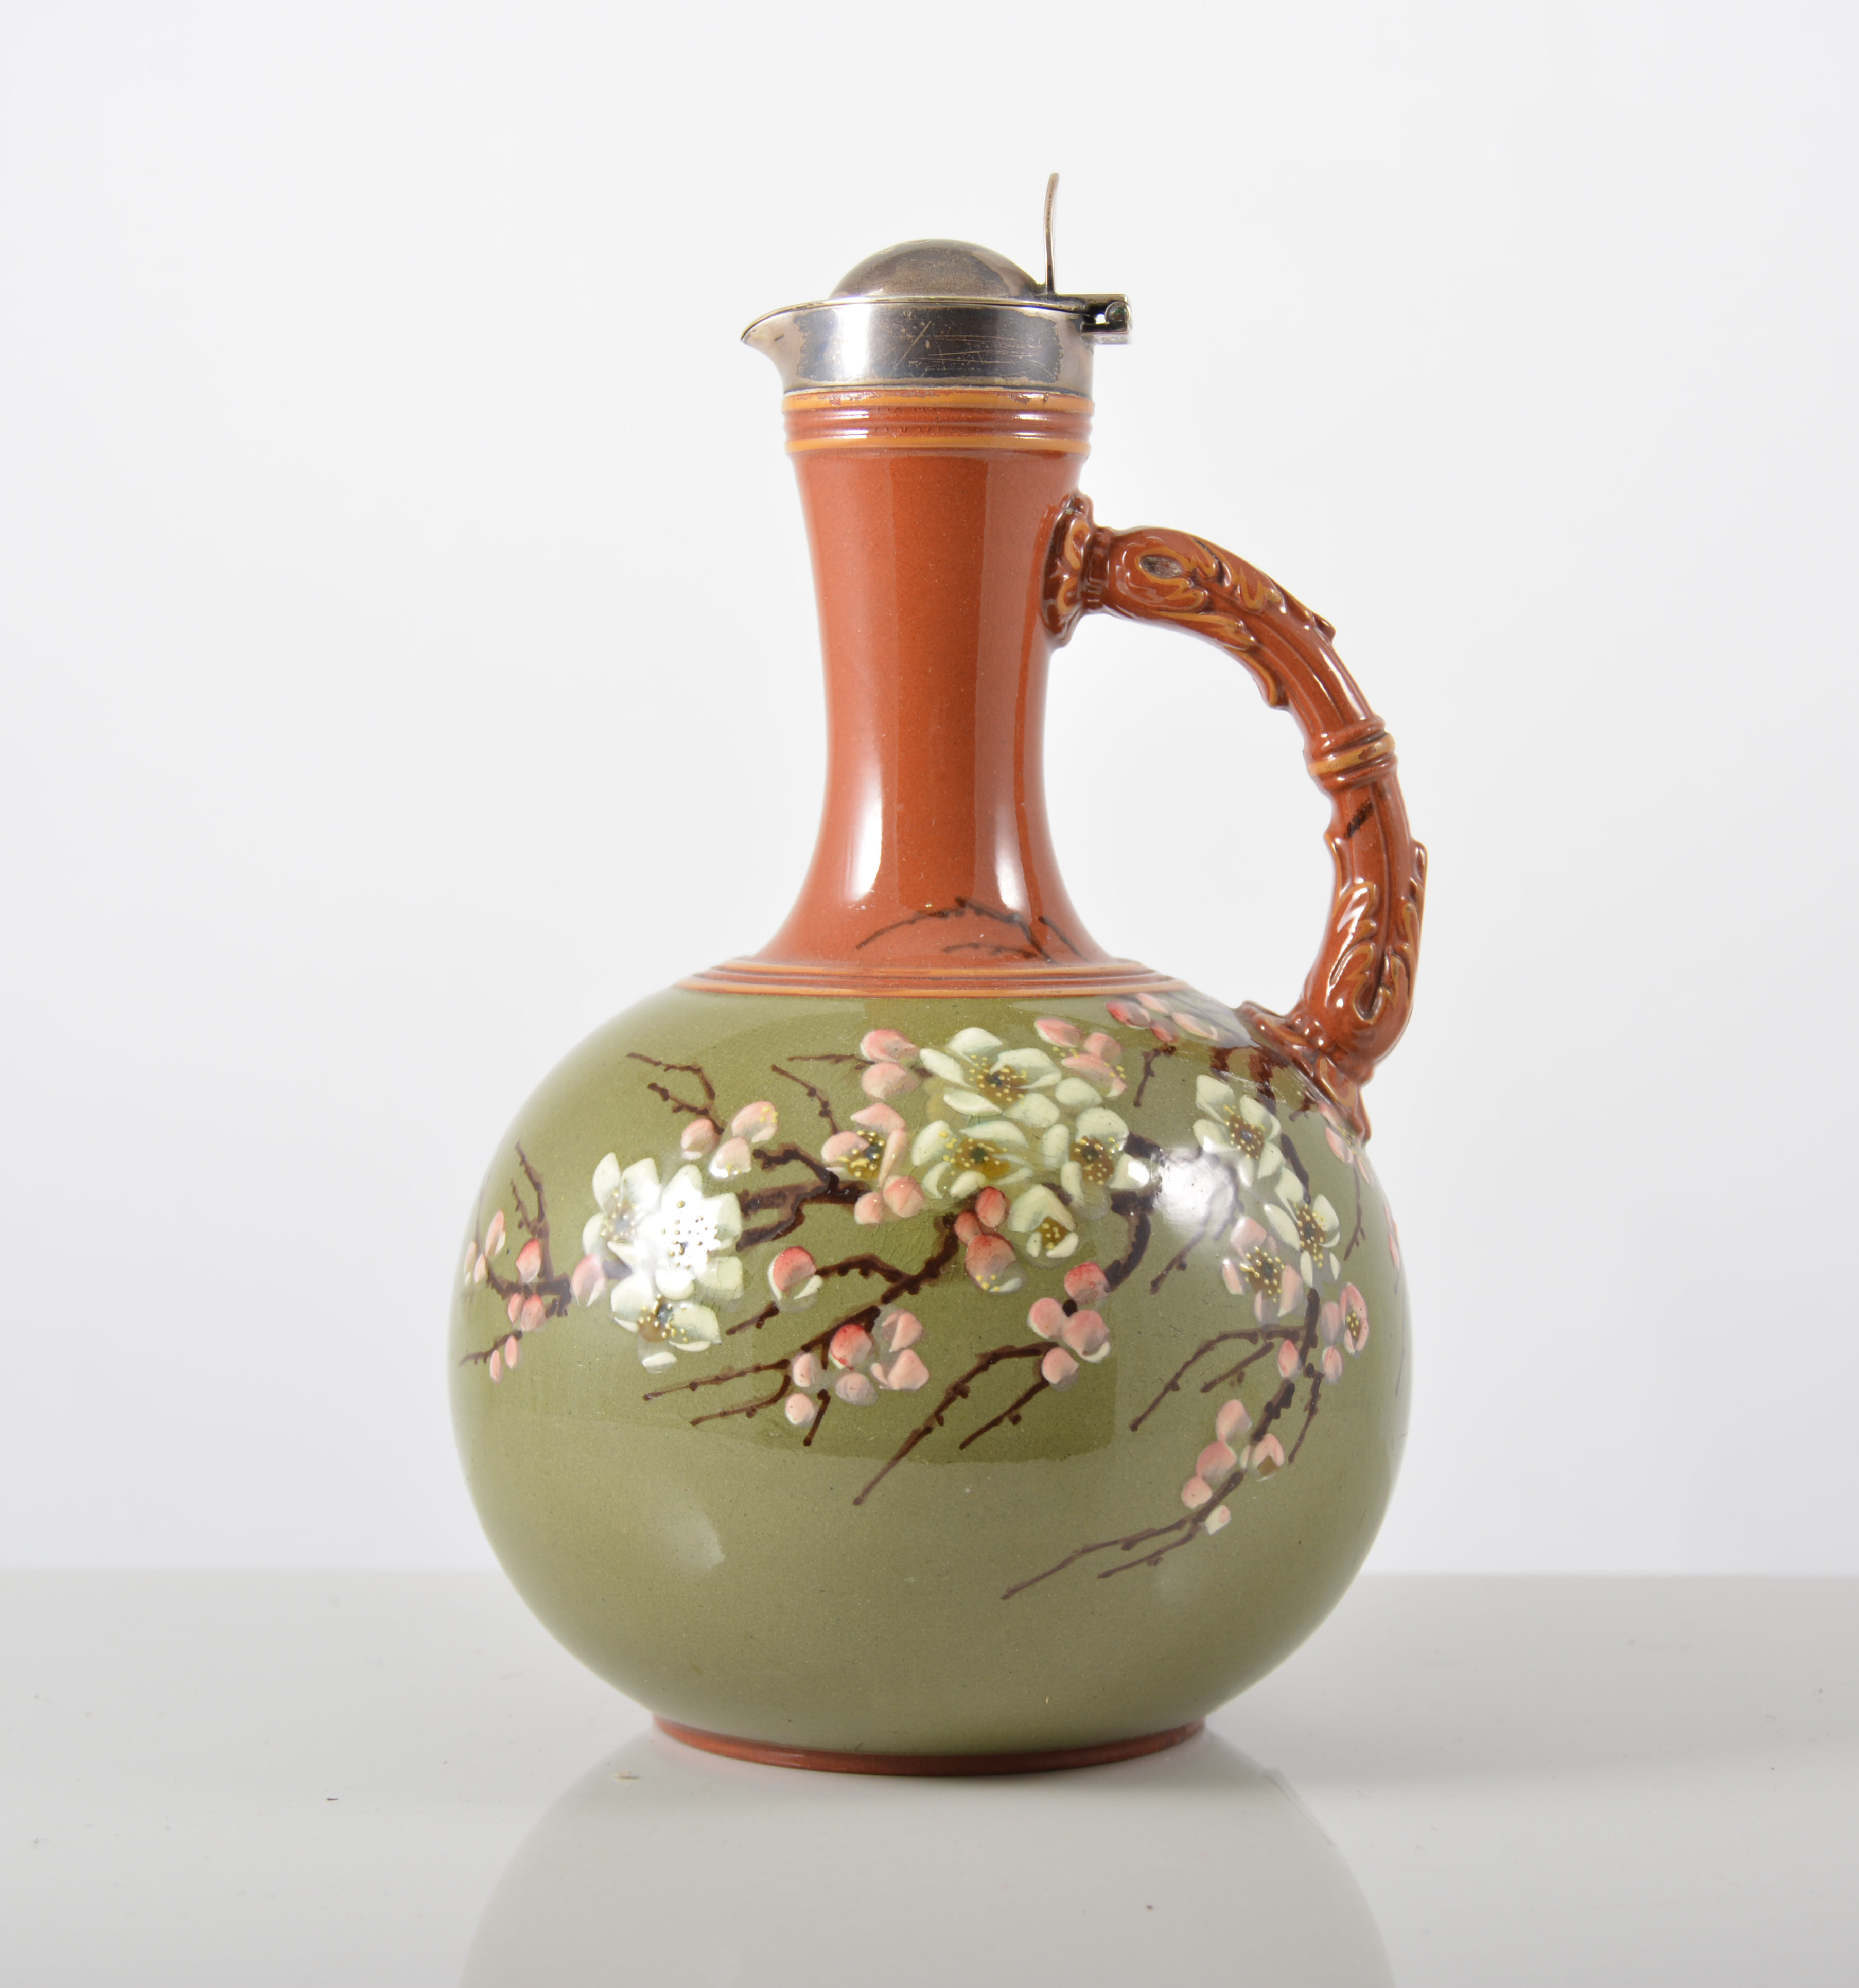 Torquay style pottery ewer, green glazed with blossom spray, silver cover, Sheffield 1879, 18cm.